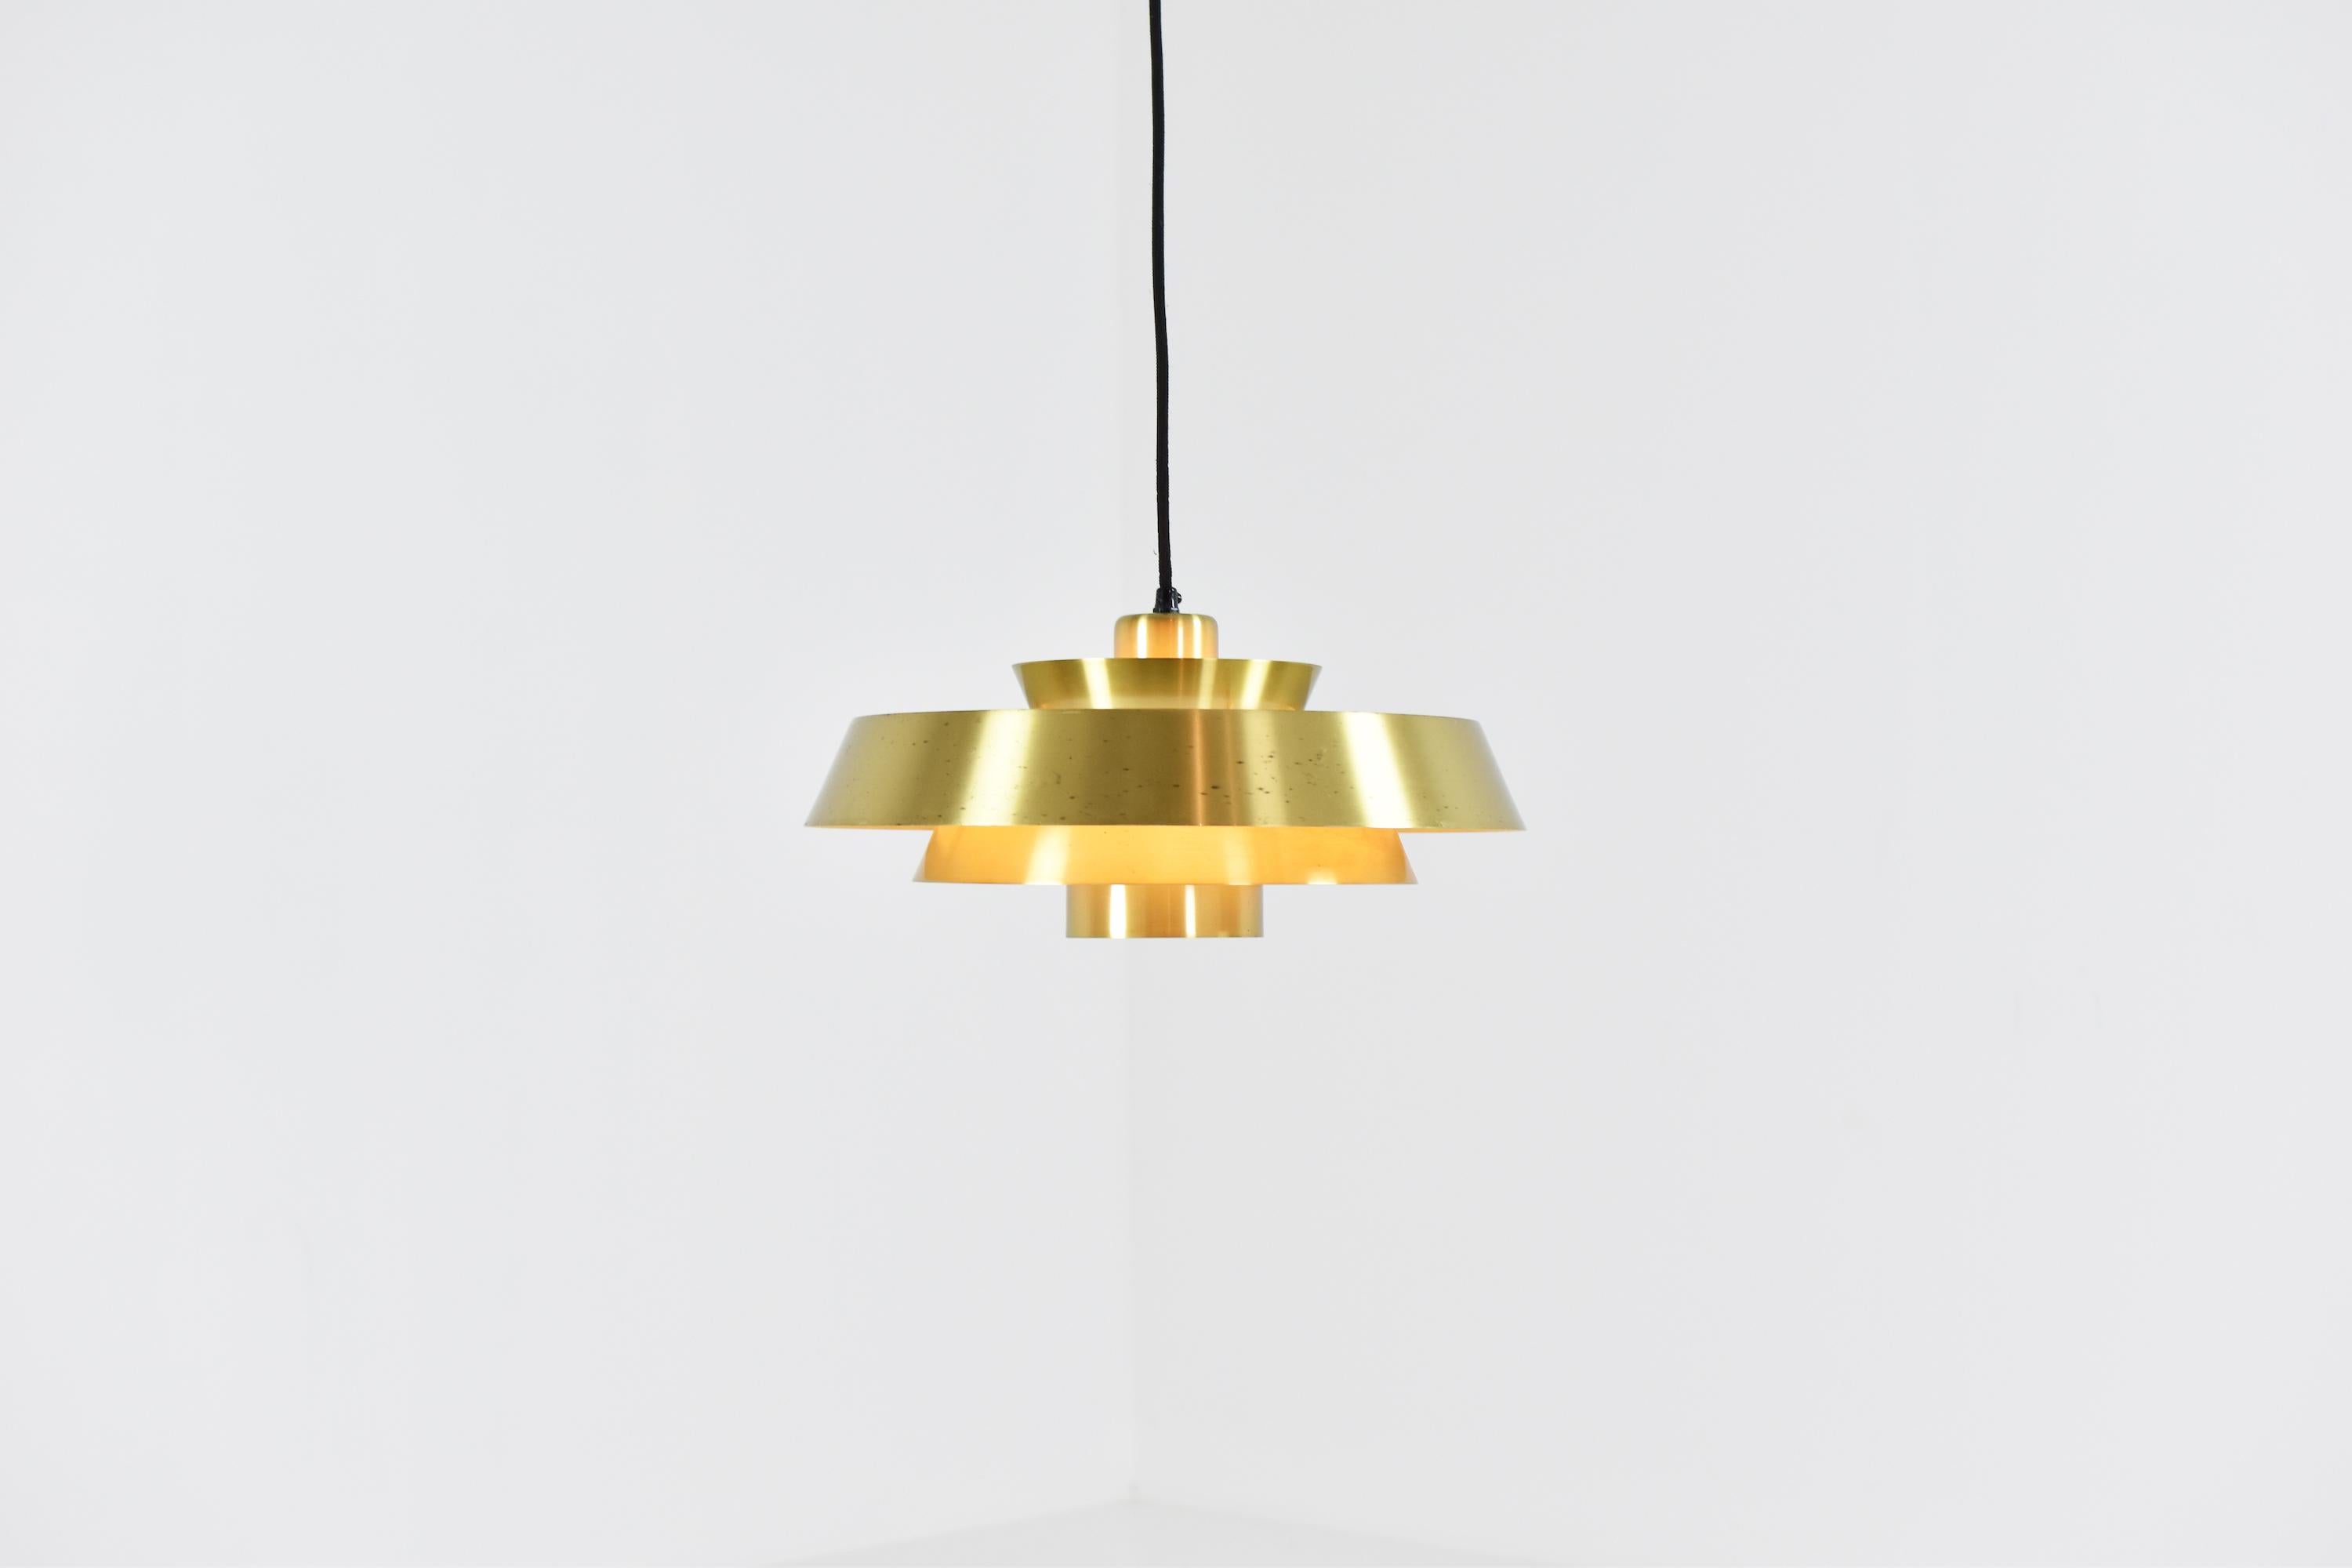 Lovely brass ‘Nova’ pendant designed by Jo Hammerborg for Fog and Mørup, Denmark, 1960s. This midcentury pendant remains in a very good original vintage condition and is newly rewired!